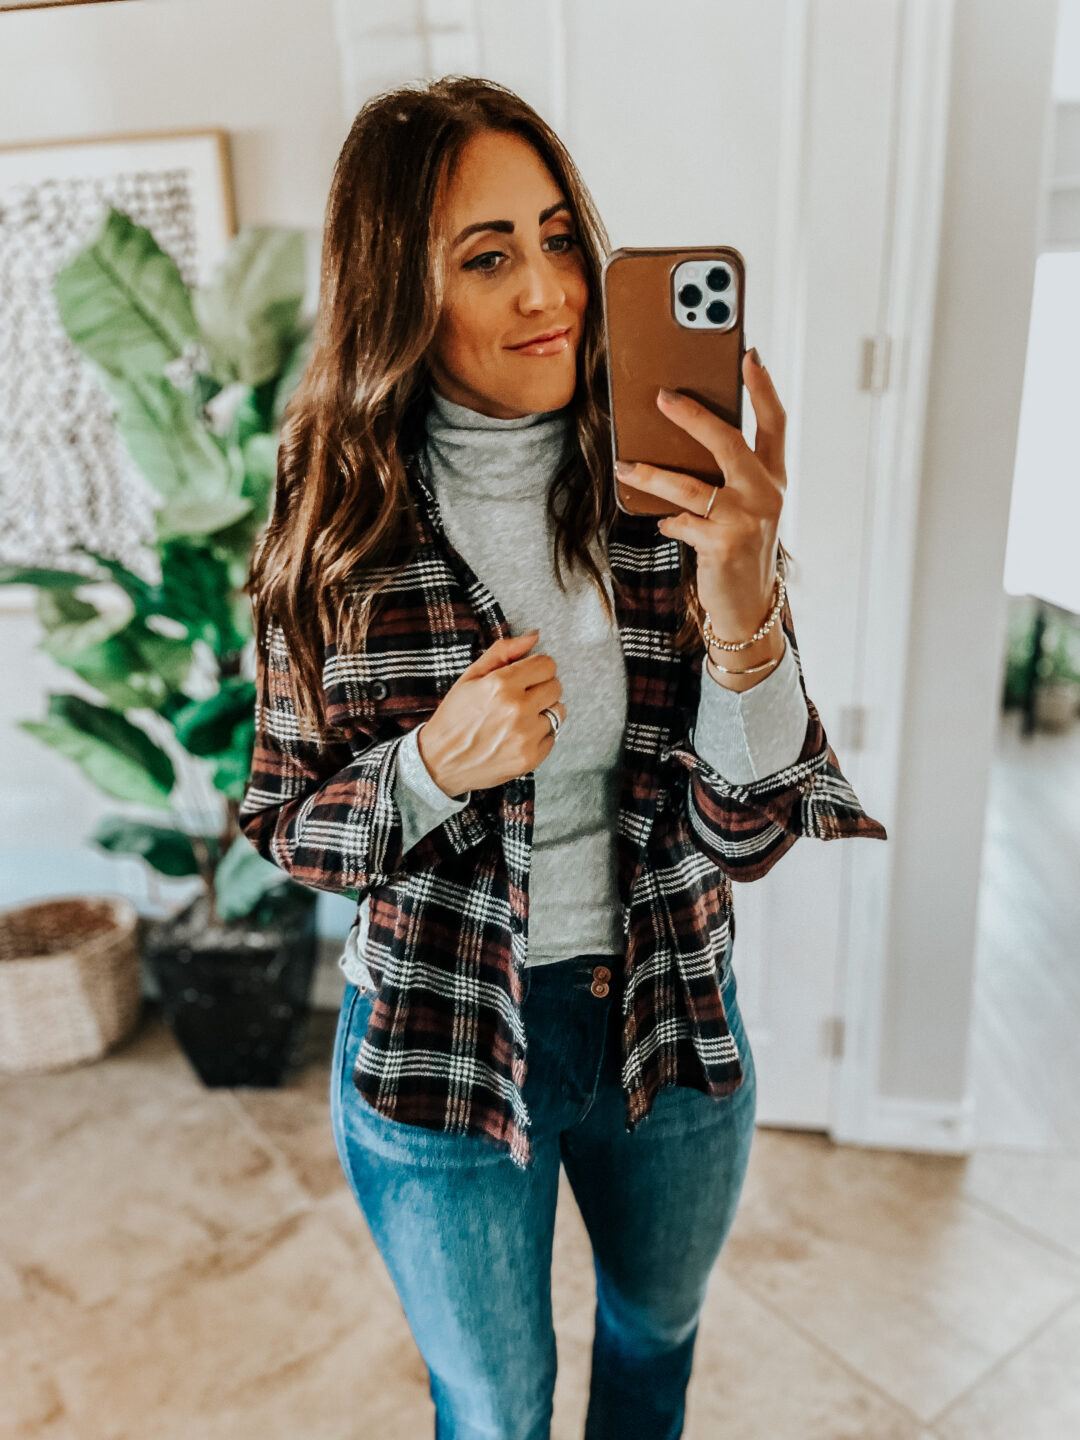 Walmart Haul // Fall Basics for Your Closet - This is our Bliss